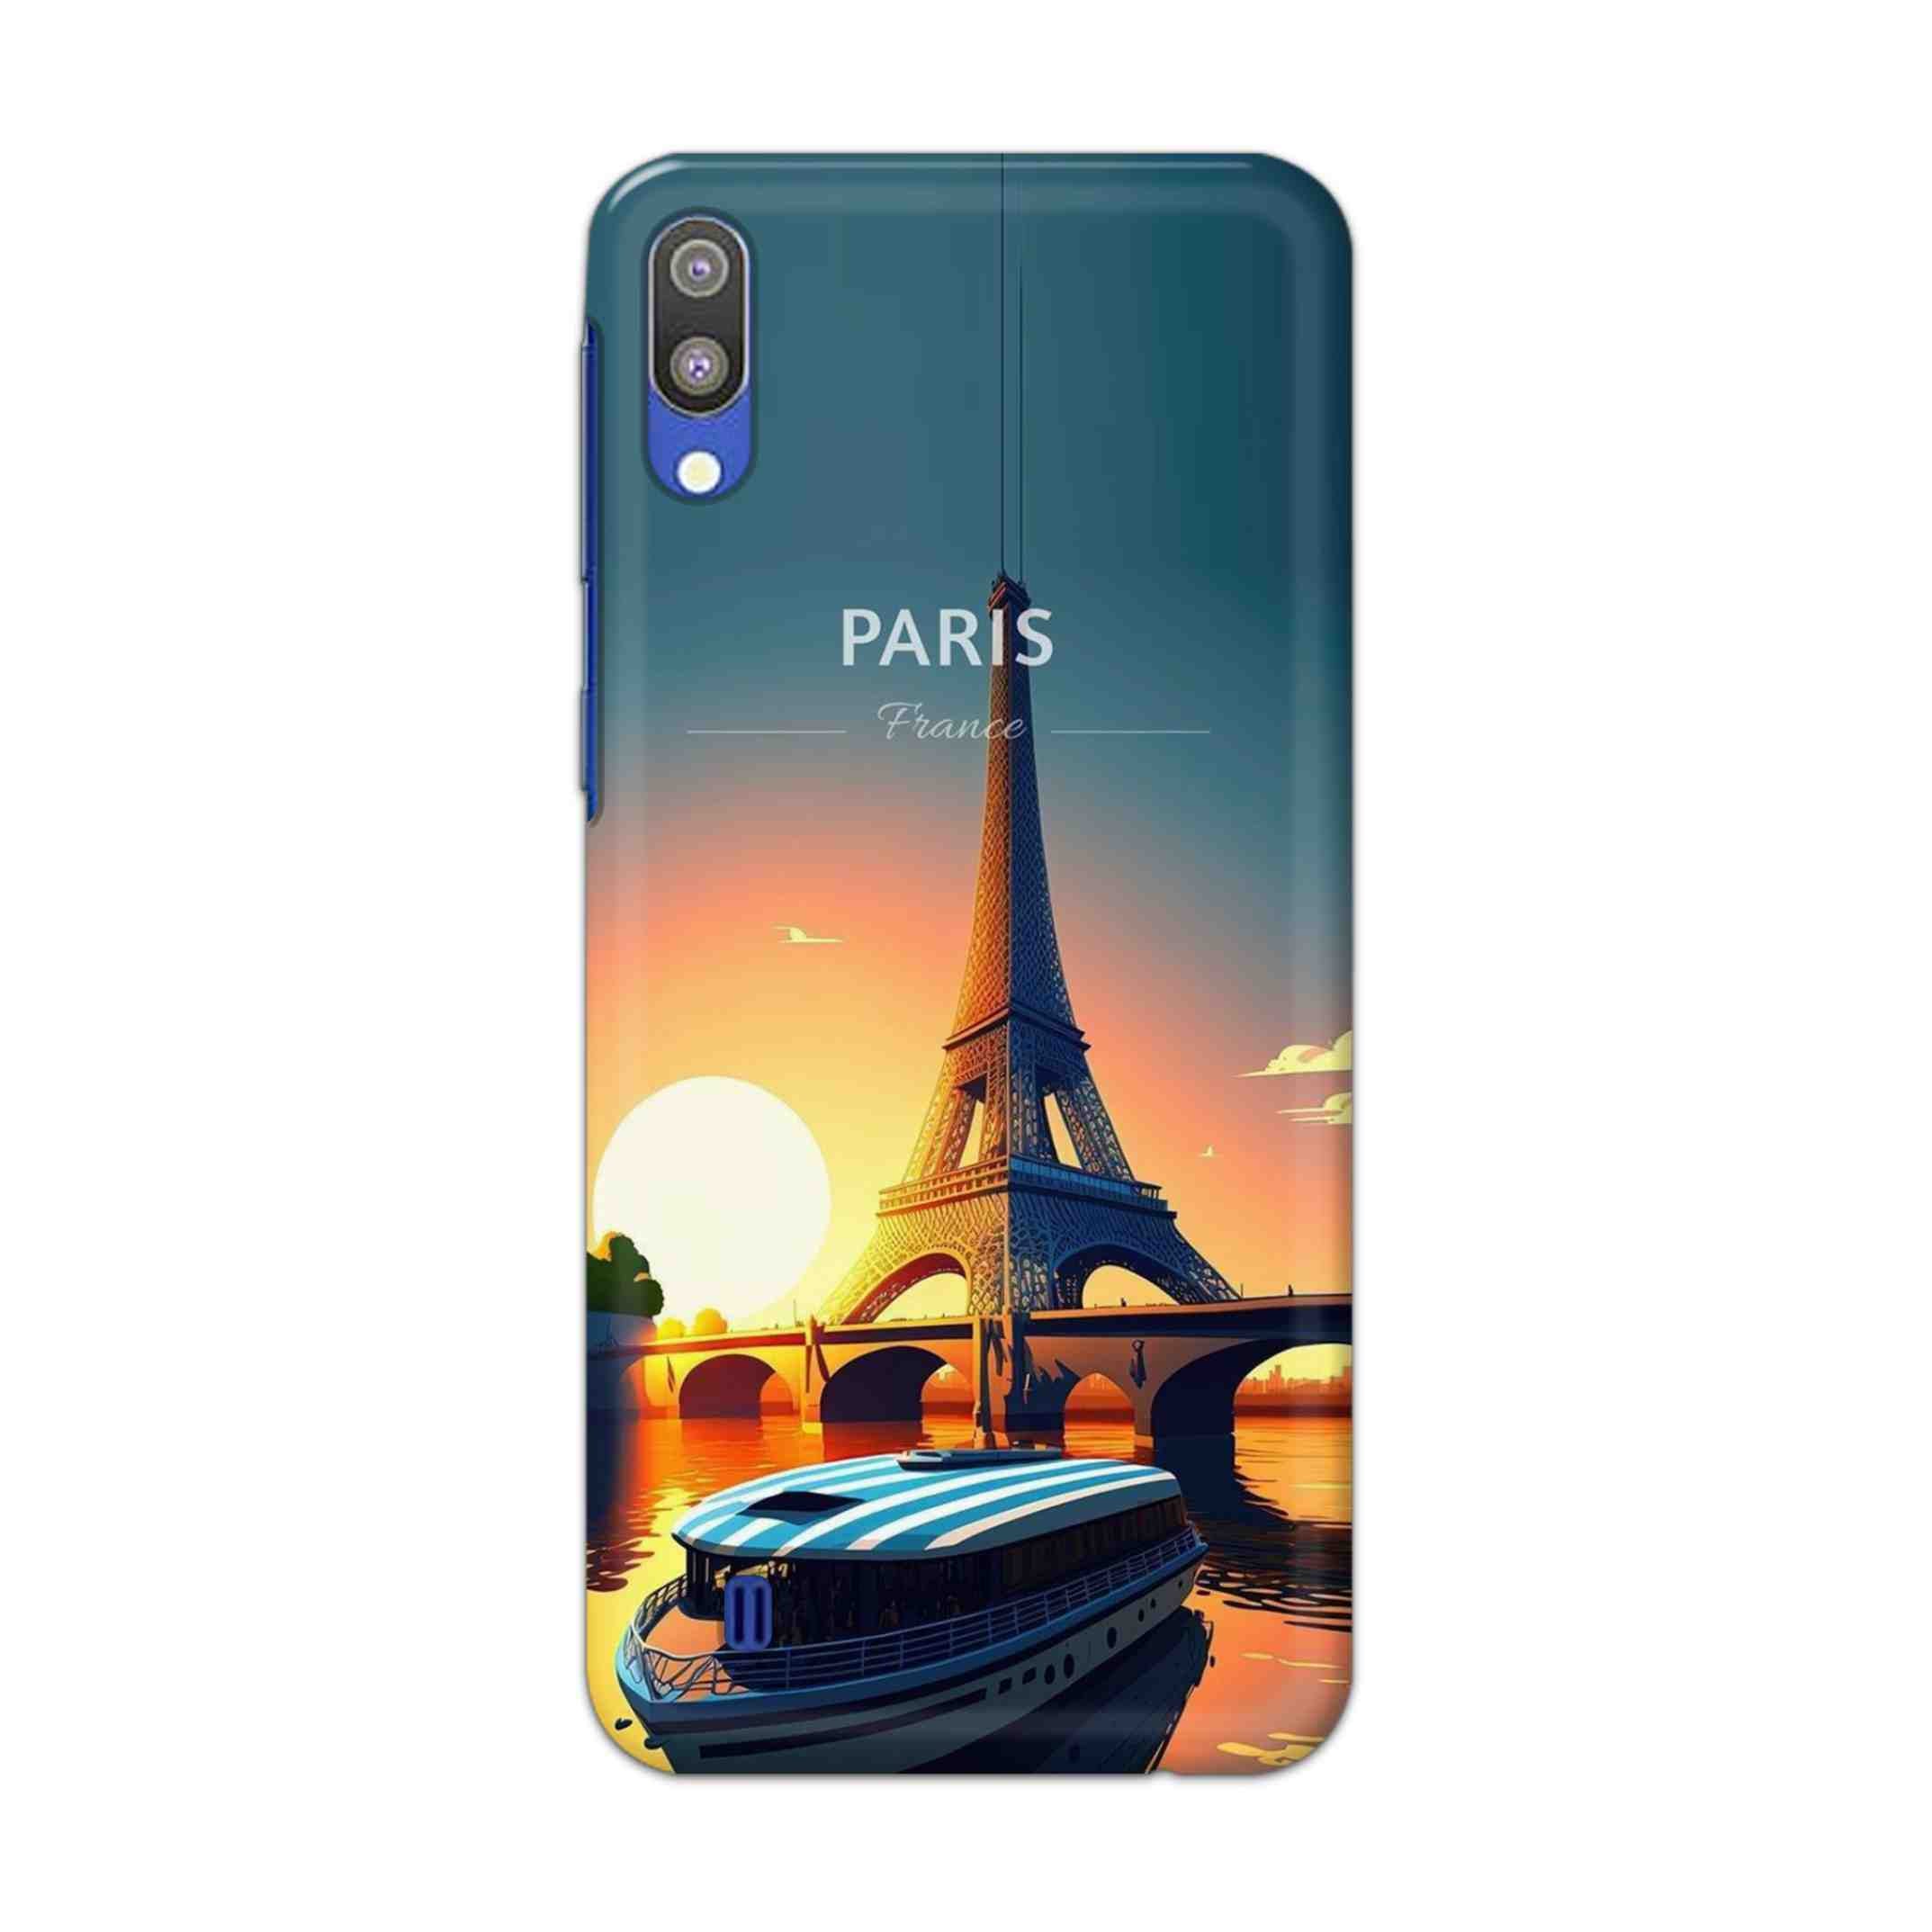 Buy France Hard Back Mobile Phone Case Cover For Samsung Galaxy M10 Online